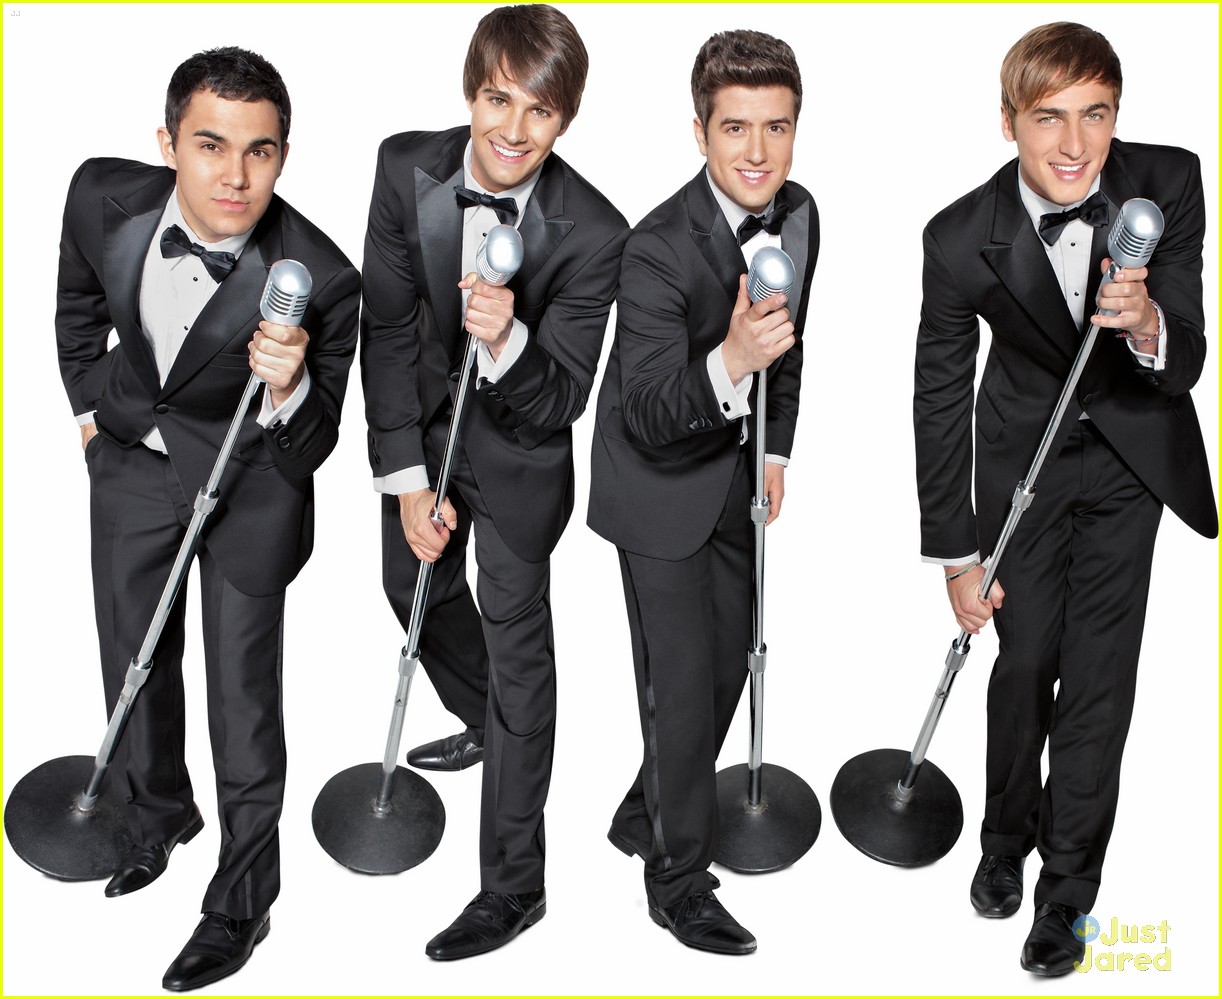 big time rush s3 gallery 15